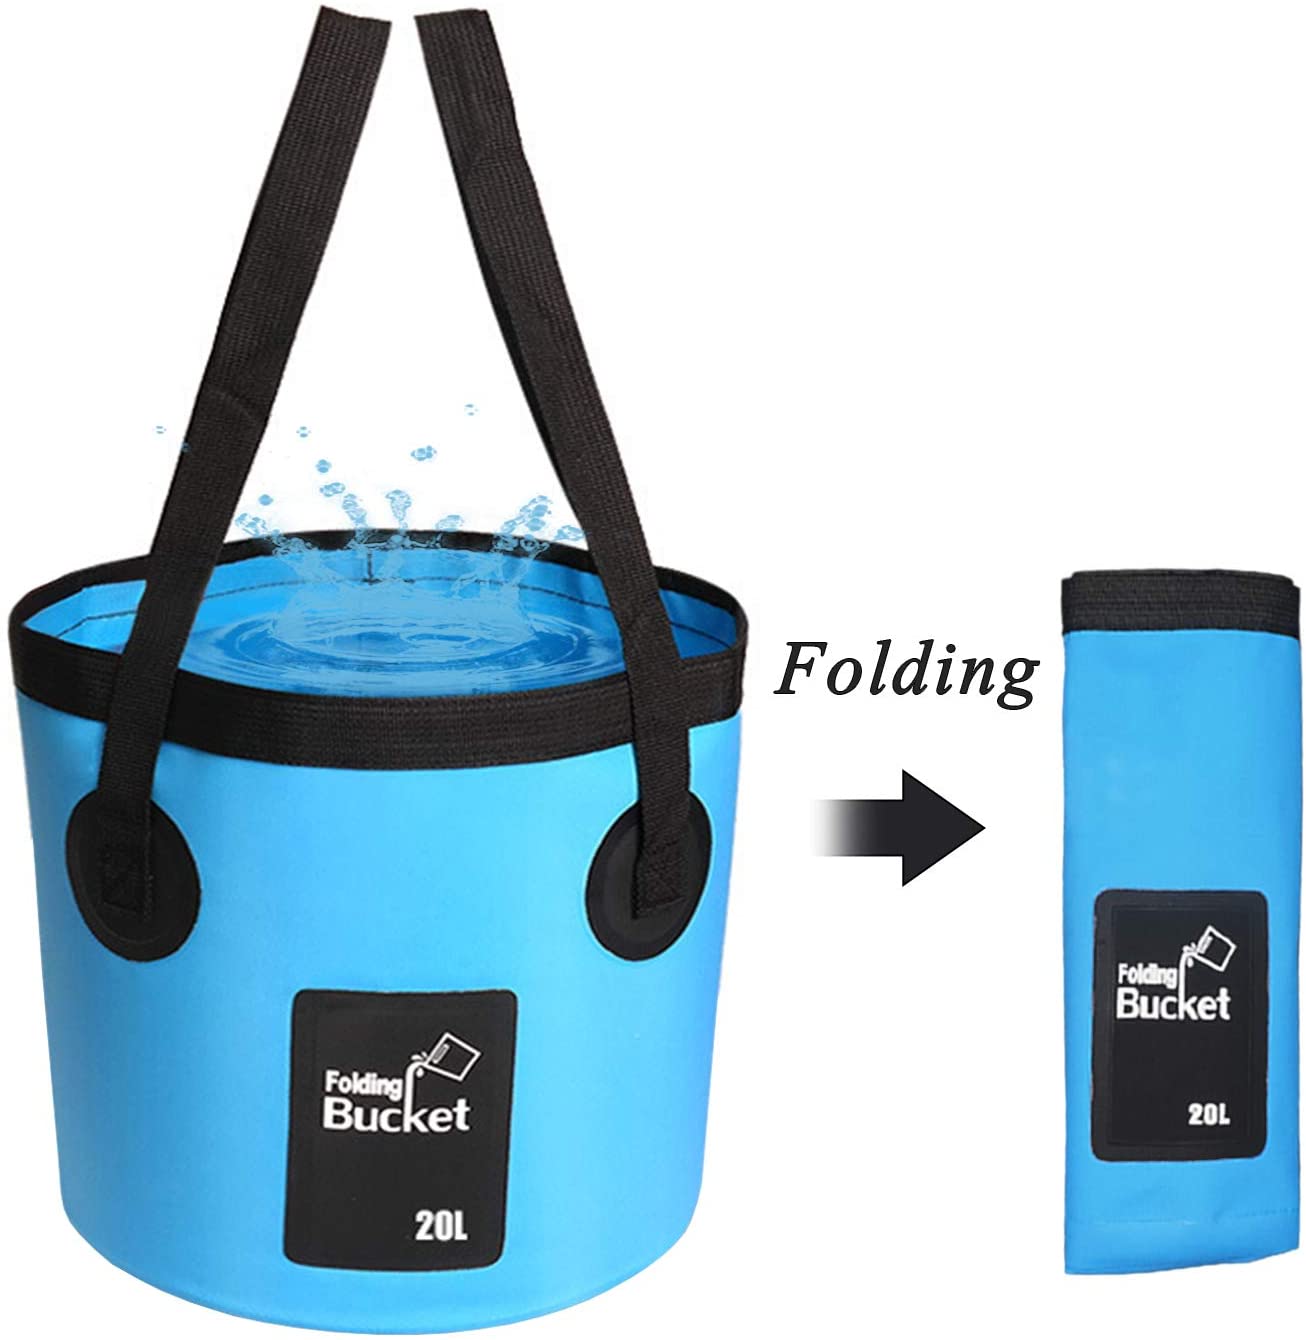 Details about   Collapsible Bucket Esthesia 5 Gallon Bucket Multifunctional Portable Collapsibl 